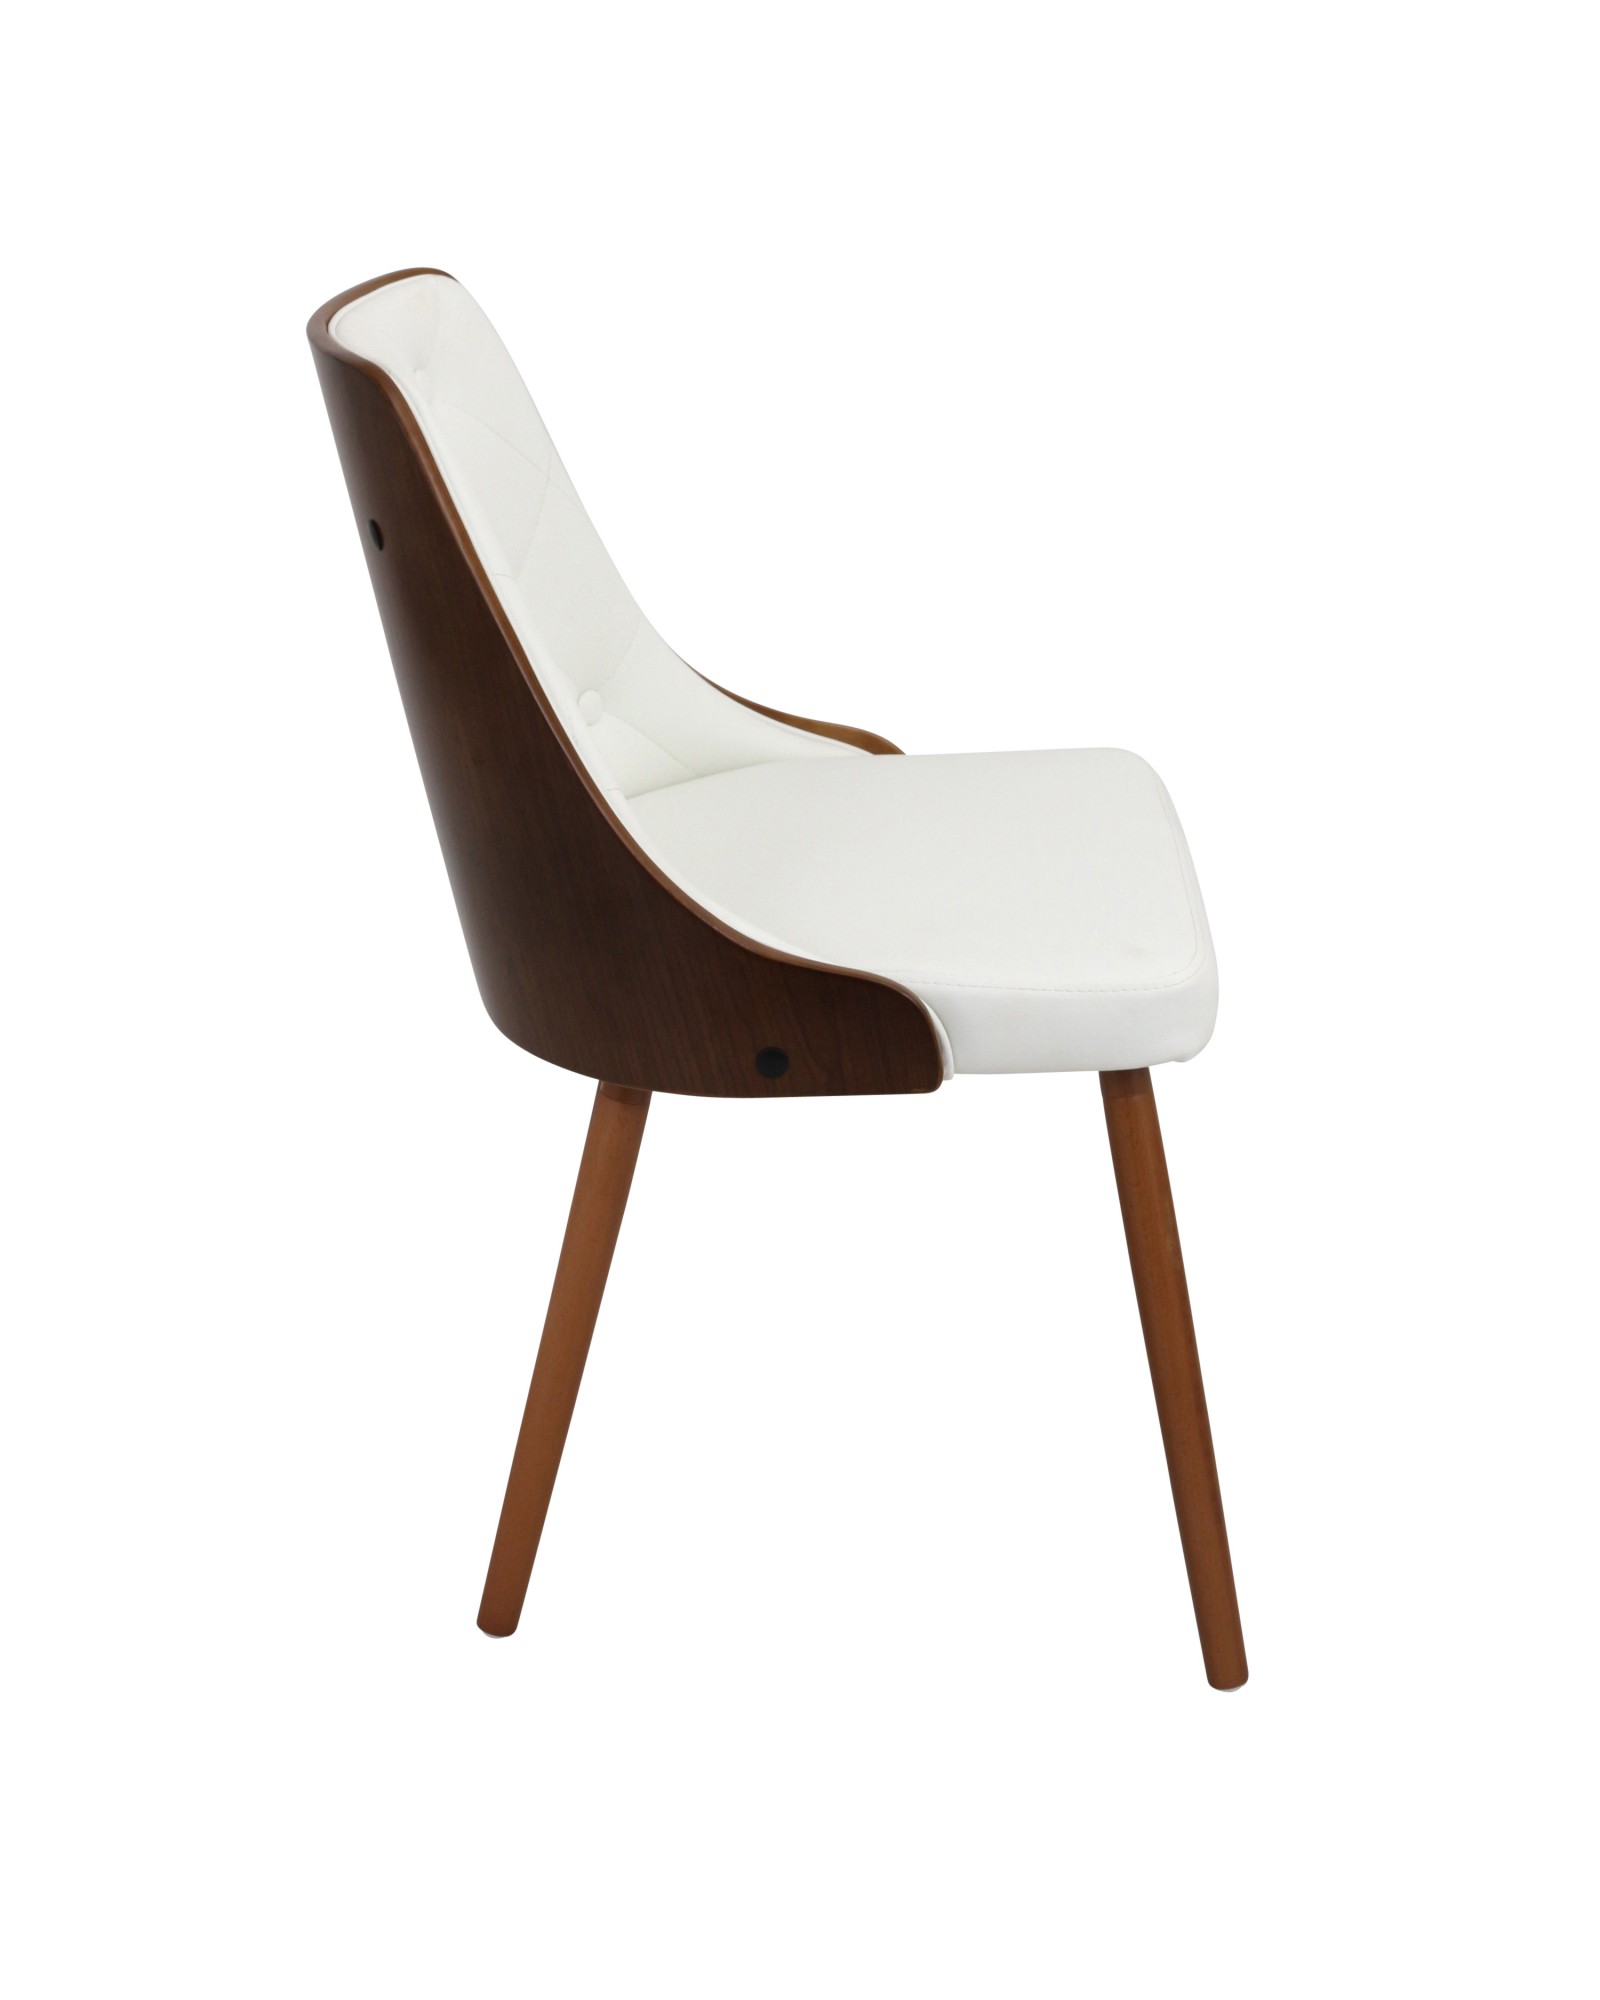 Gianna Mid-Century Modern Dining/Accent Chair in Walnut with White Faux Leather